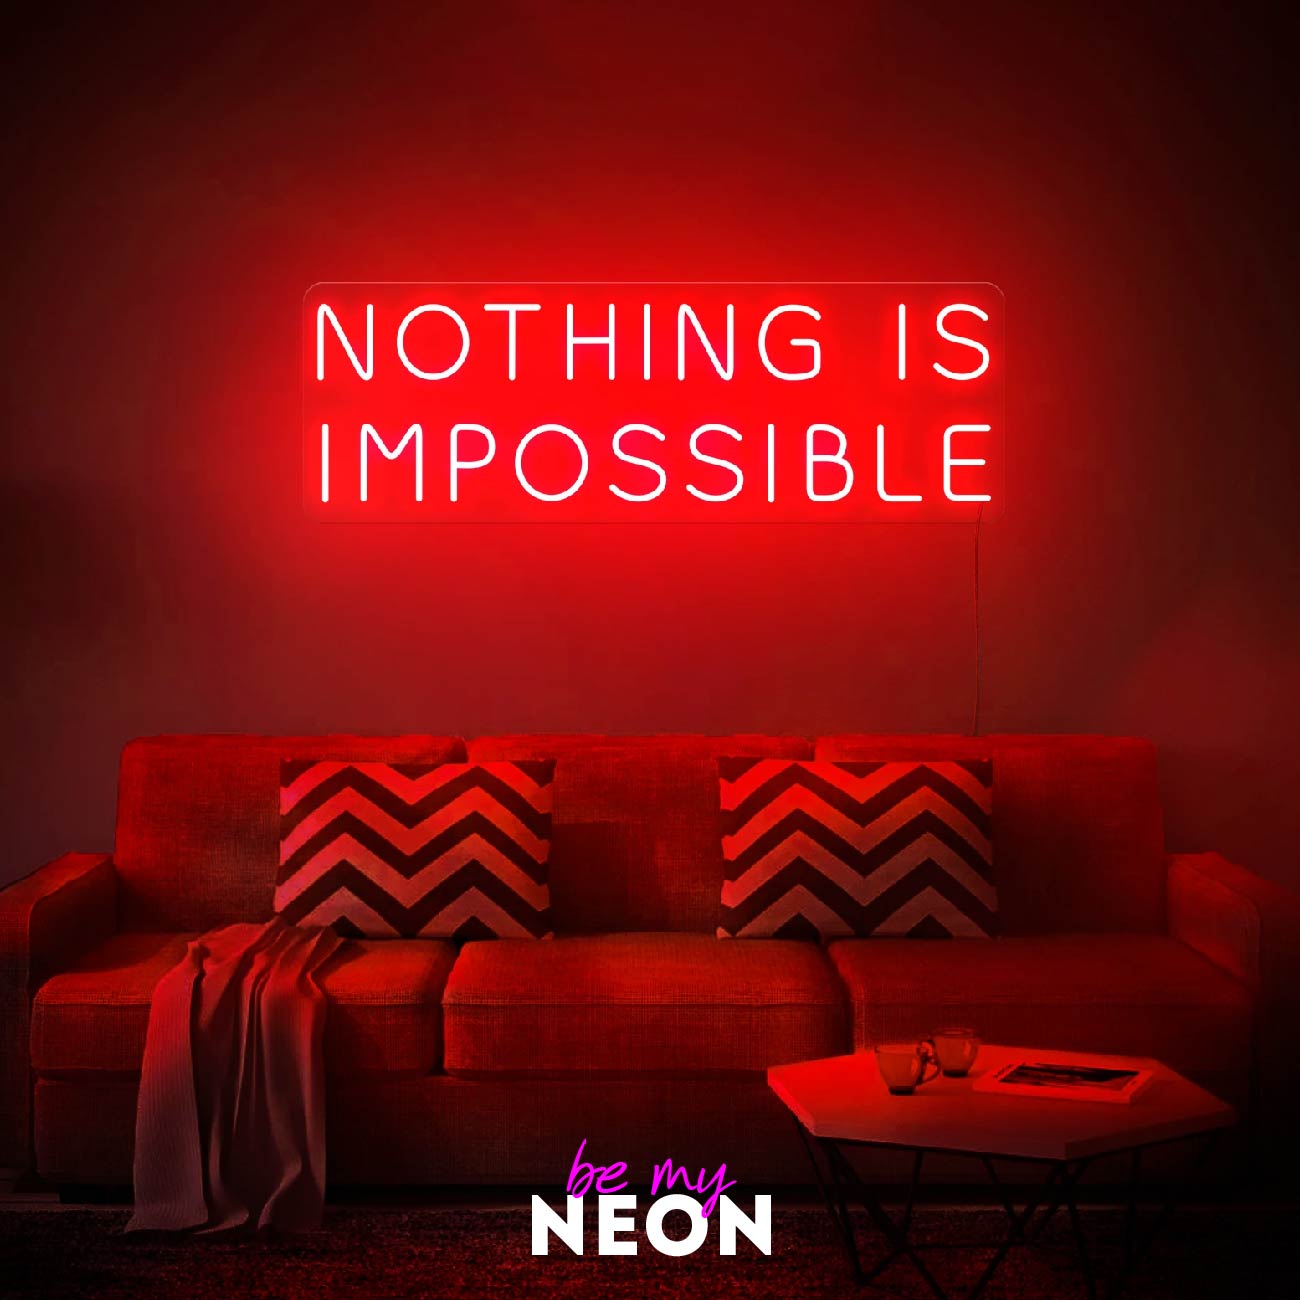 "NOTHING IS IMPOSSIBLE" LED Neonschild